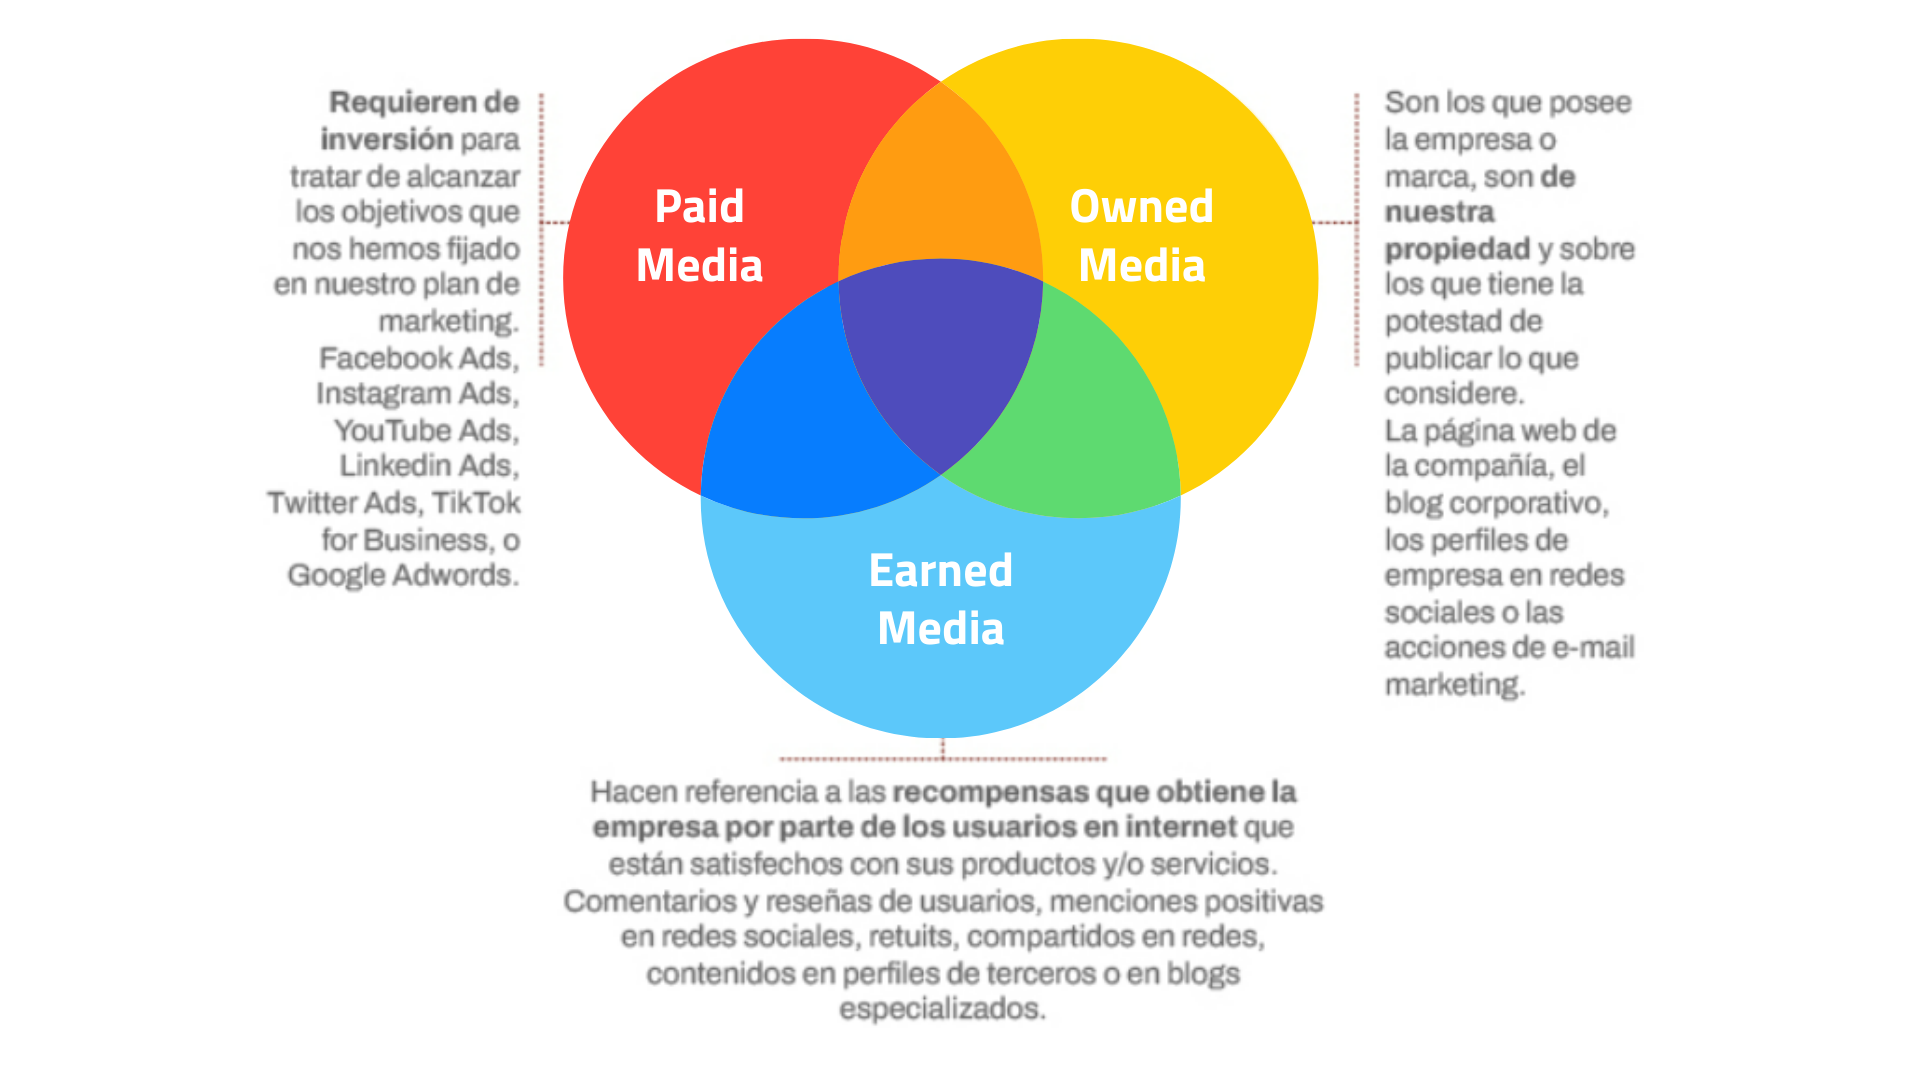 earned, owned y paid media qué son - Dobuss